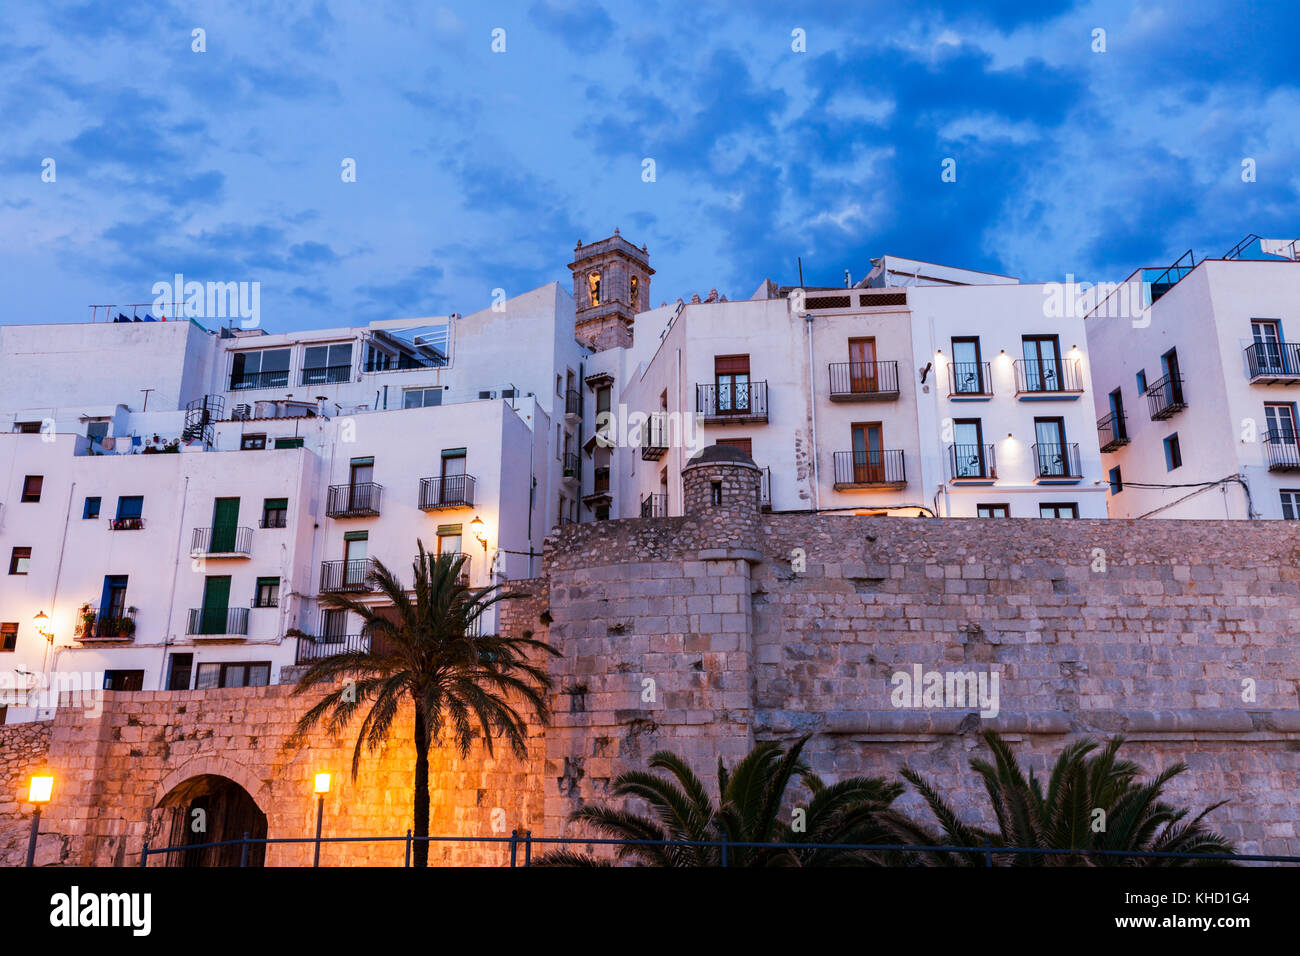 Architecture of Peniscola Old Town. Peniscola, Valencian Community, Spain. Stock Photo